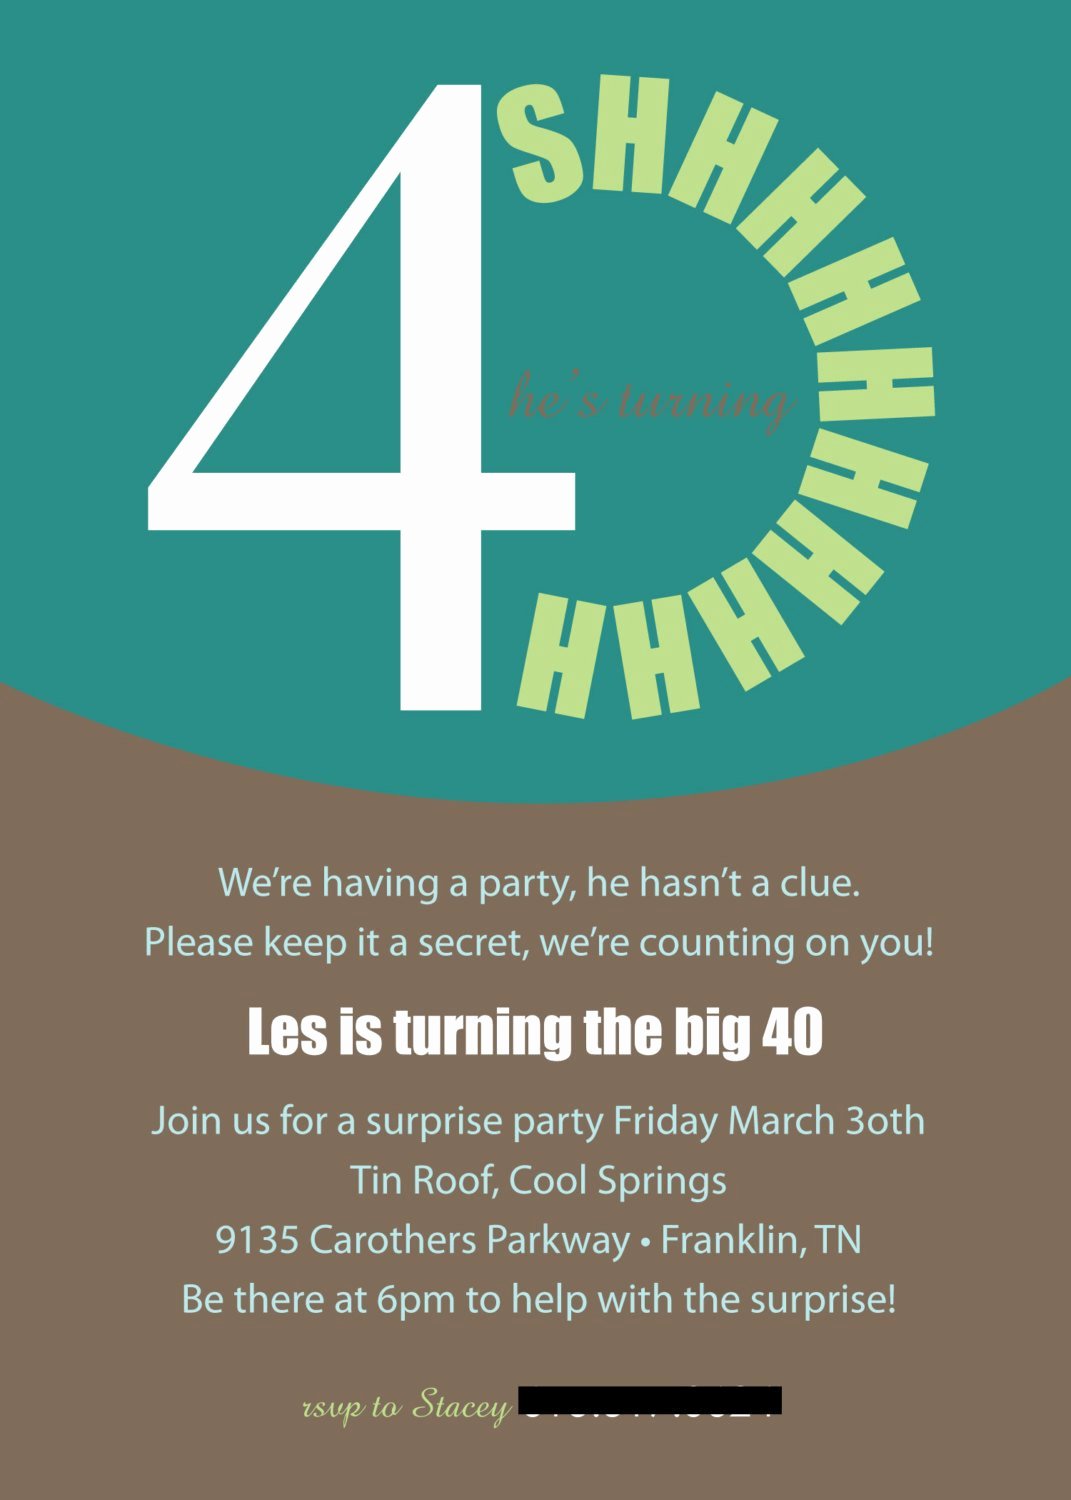 Printable or Emailable 40th Surprise Birthday Party Invitation